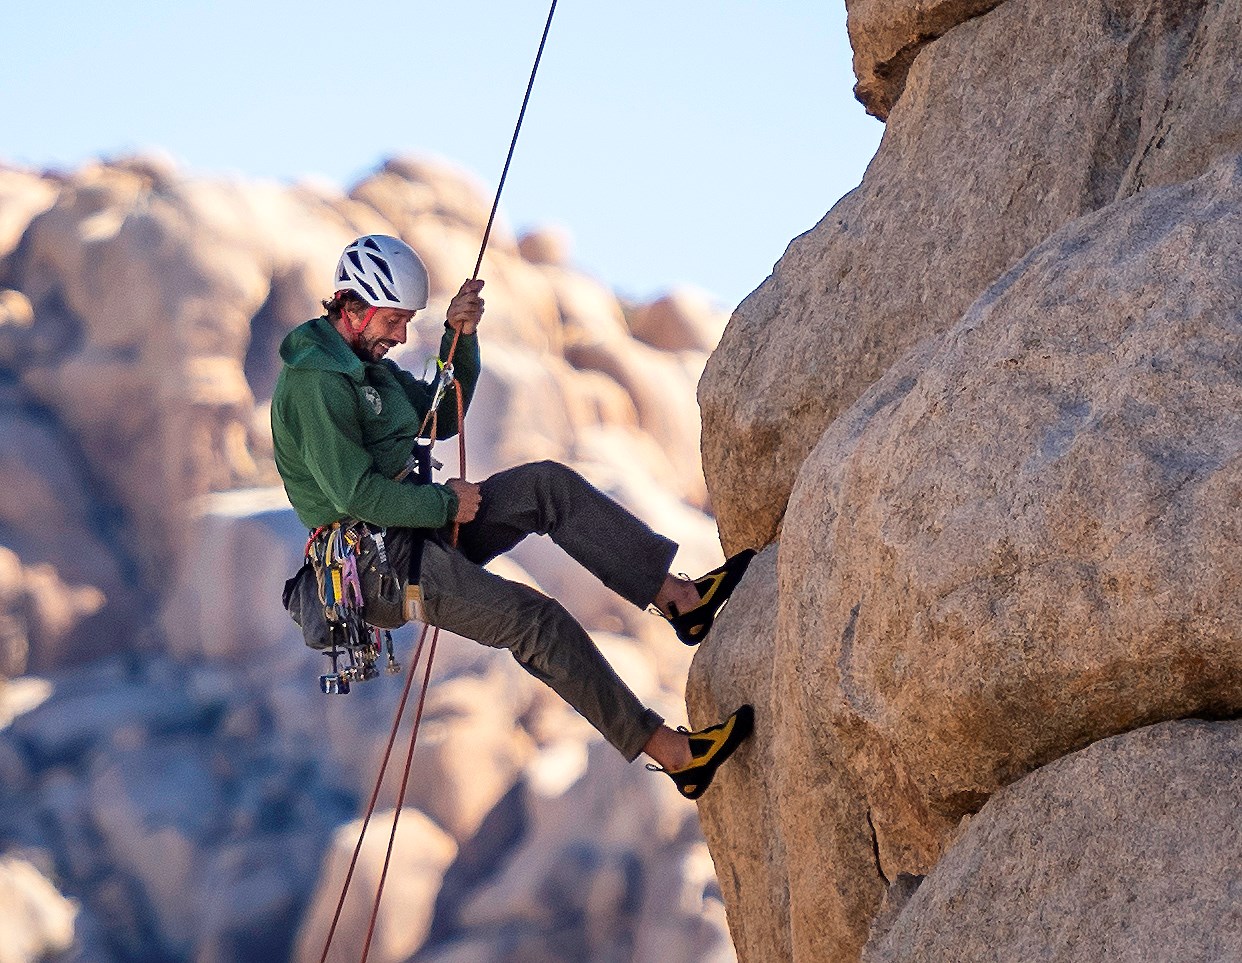 Man with helmet hangs from ropes off a rocky cliff